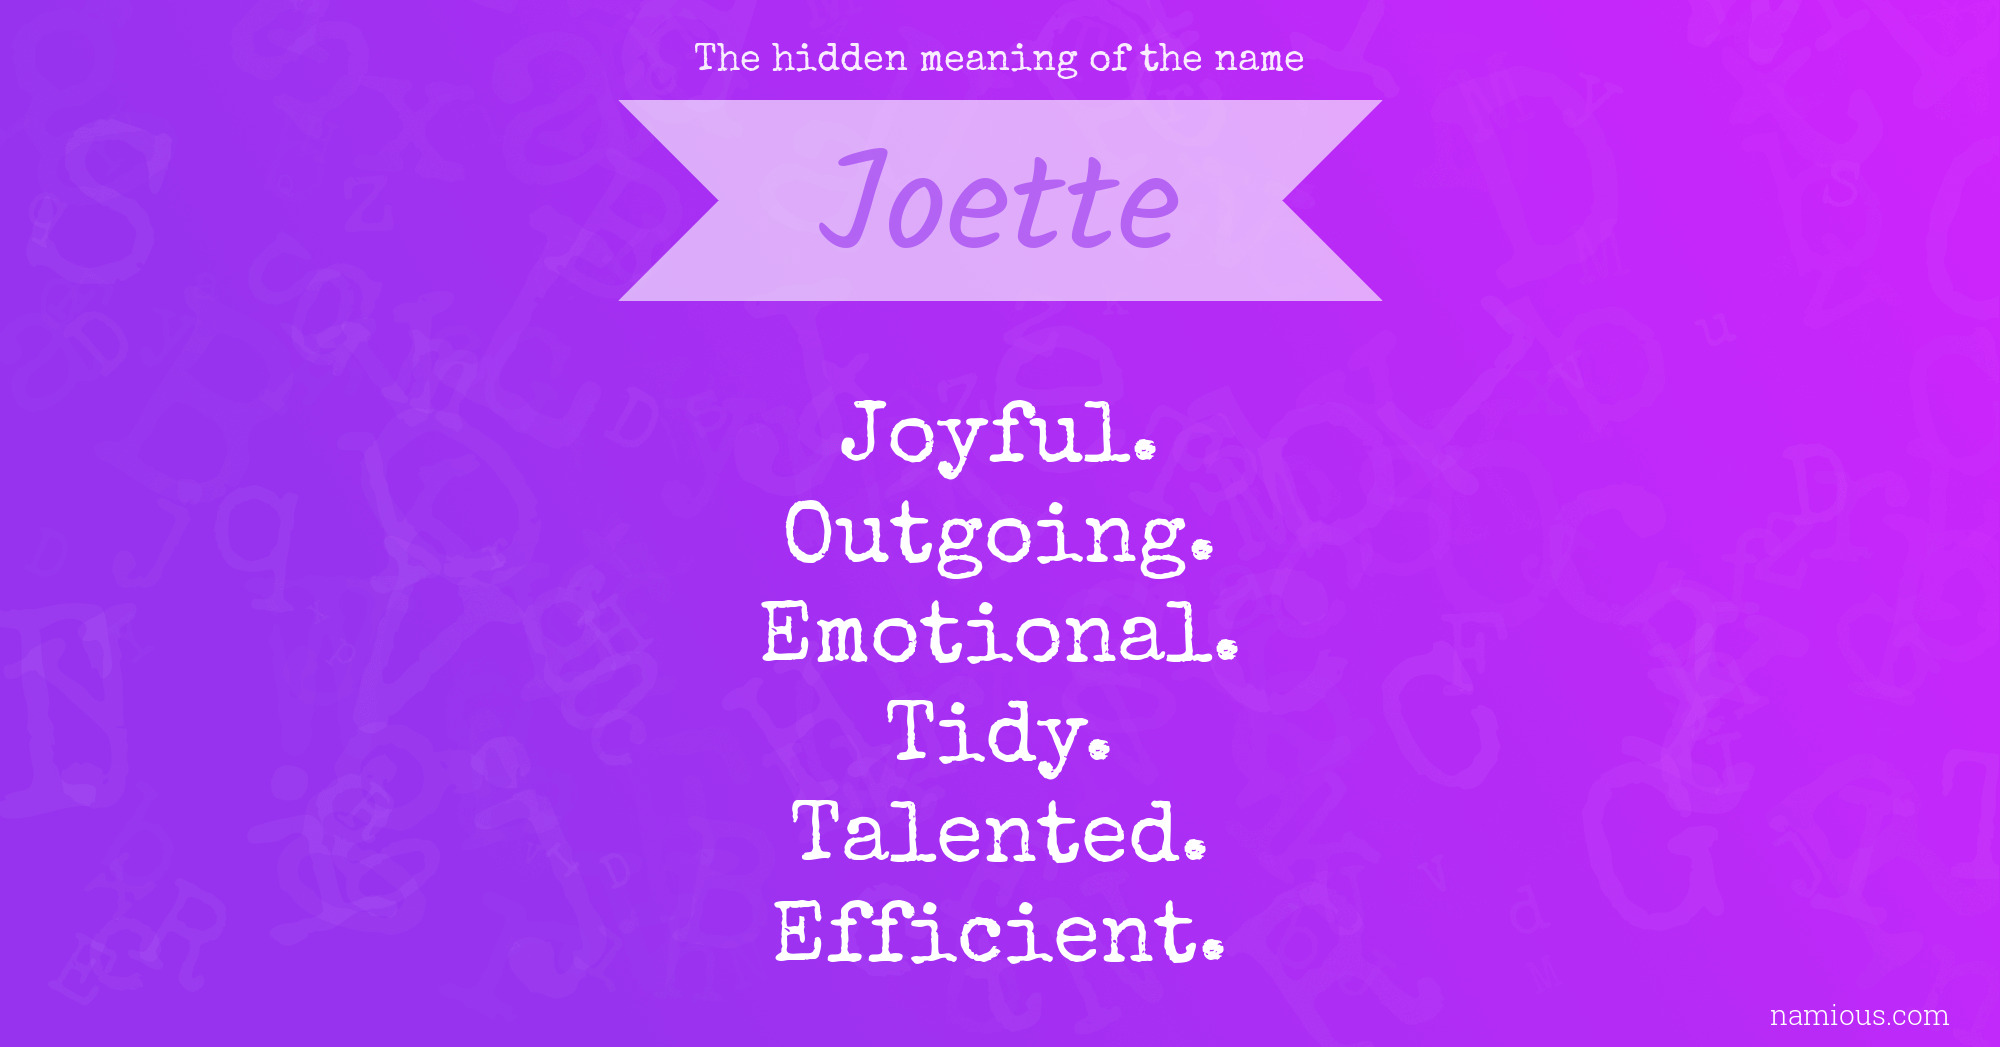 The hidden meaning of the name Joette